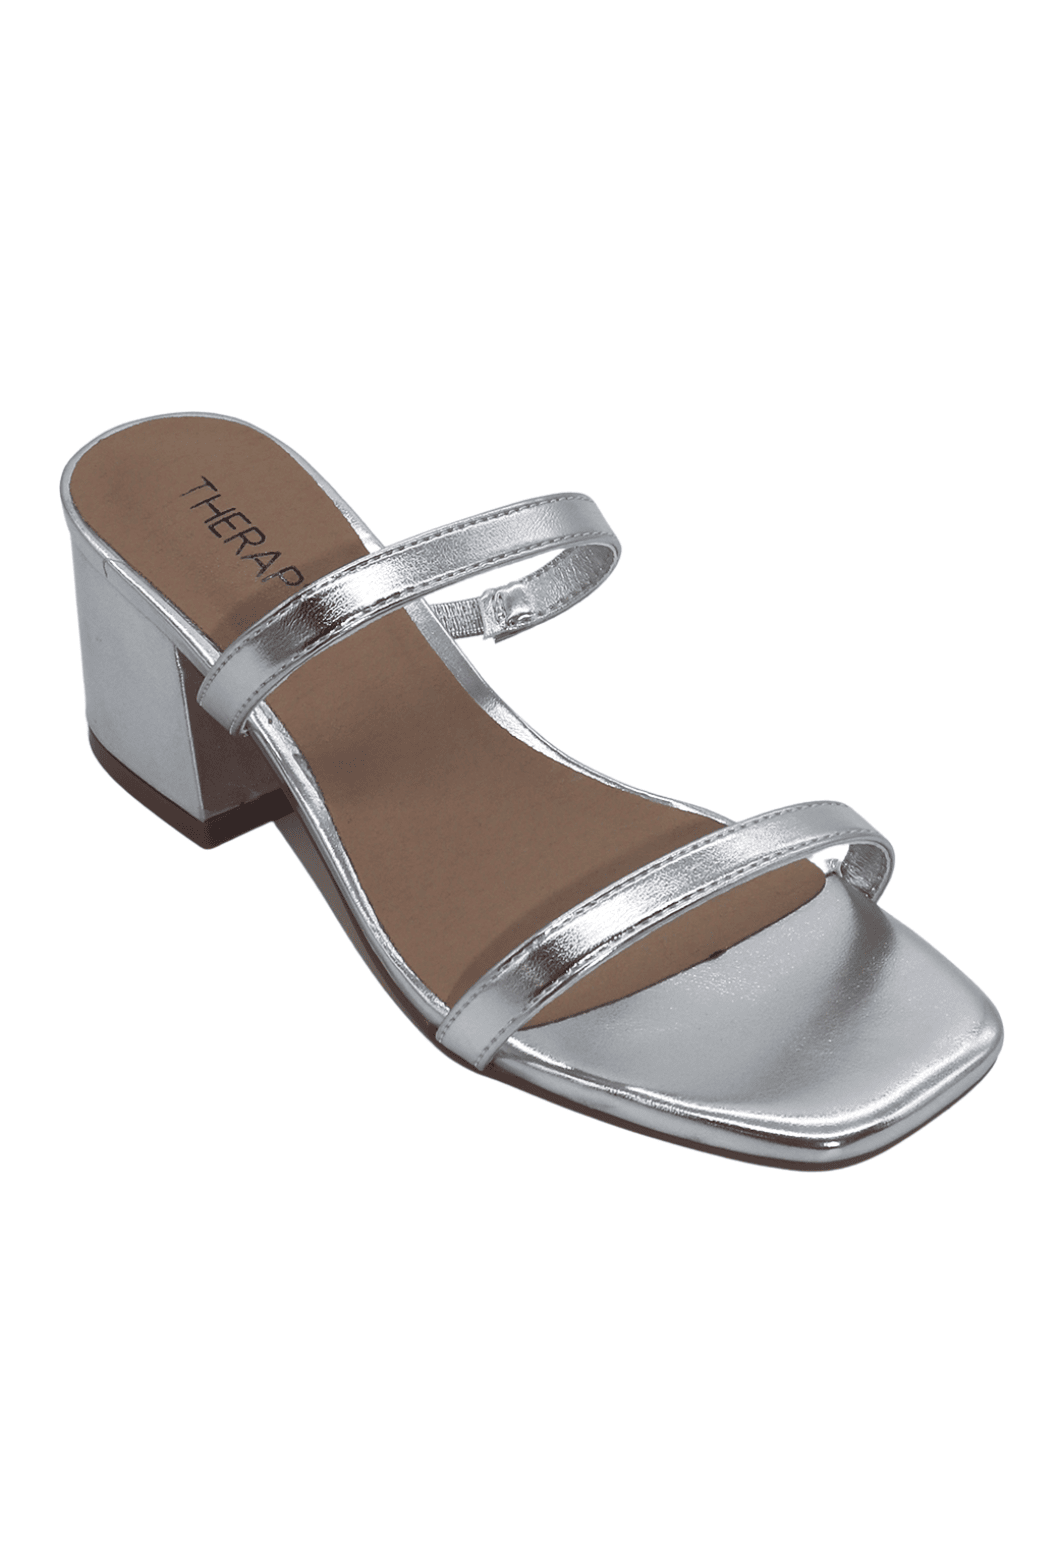 Therapy Goldie Heels Silver